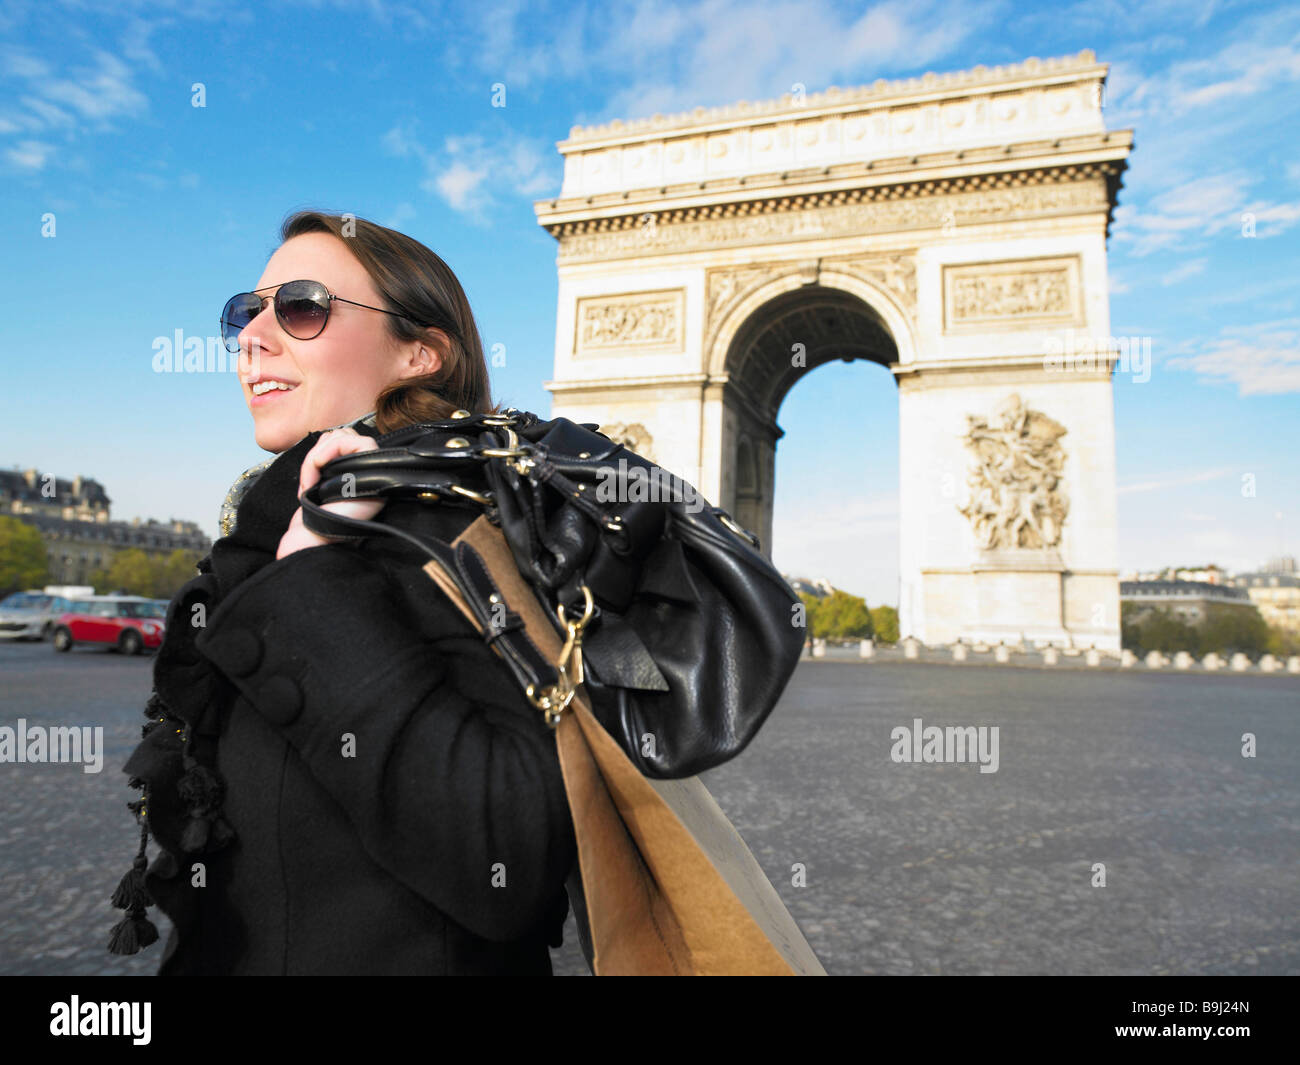 Woman walking on Champs Elysees Stock Photo